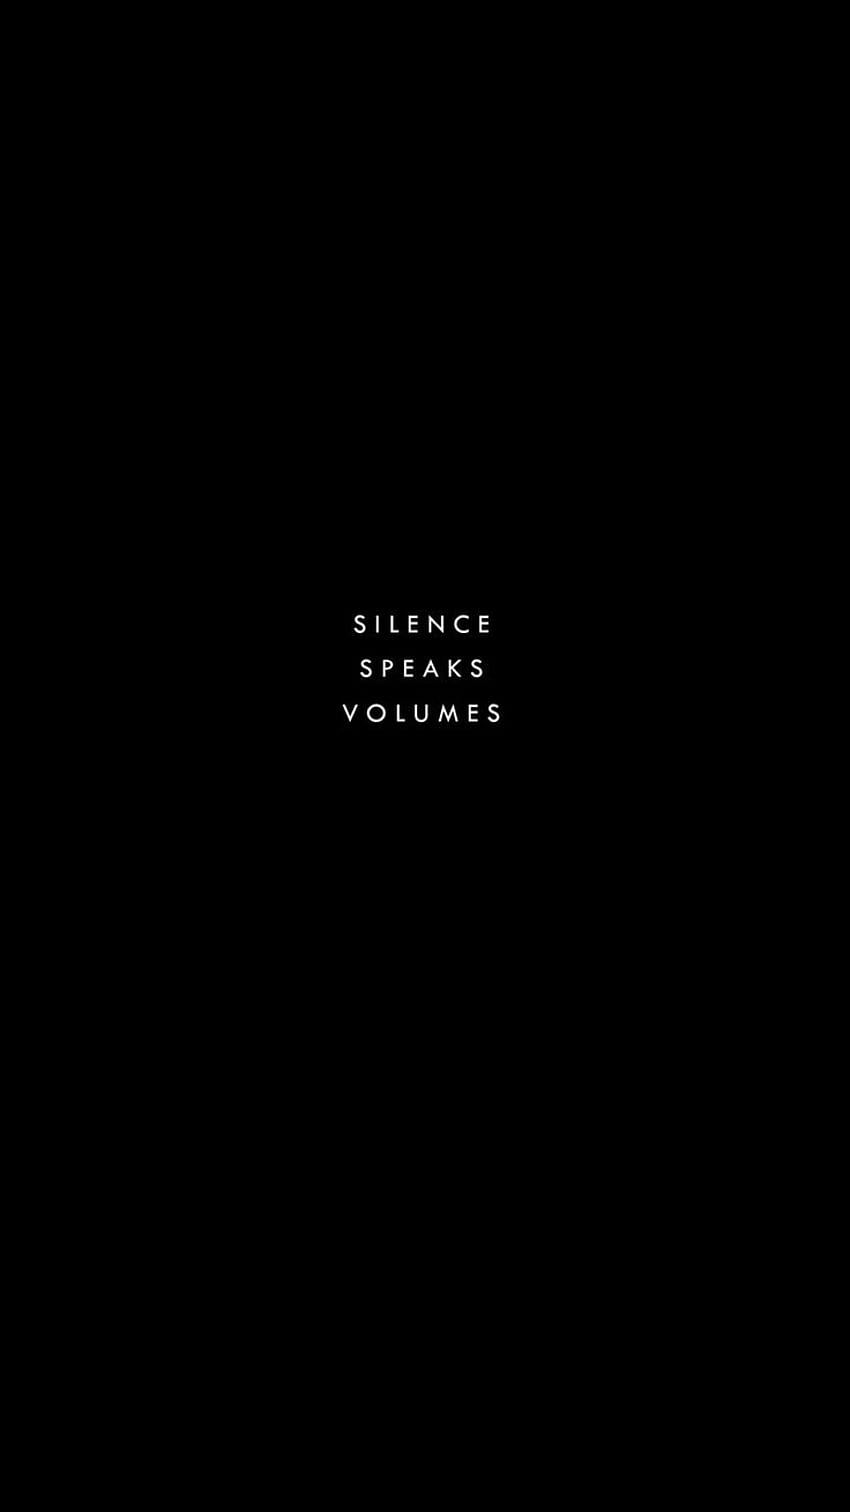 silence speaks volumes request @dilshad, keep quiet HD phone wallpaper